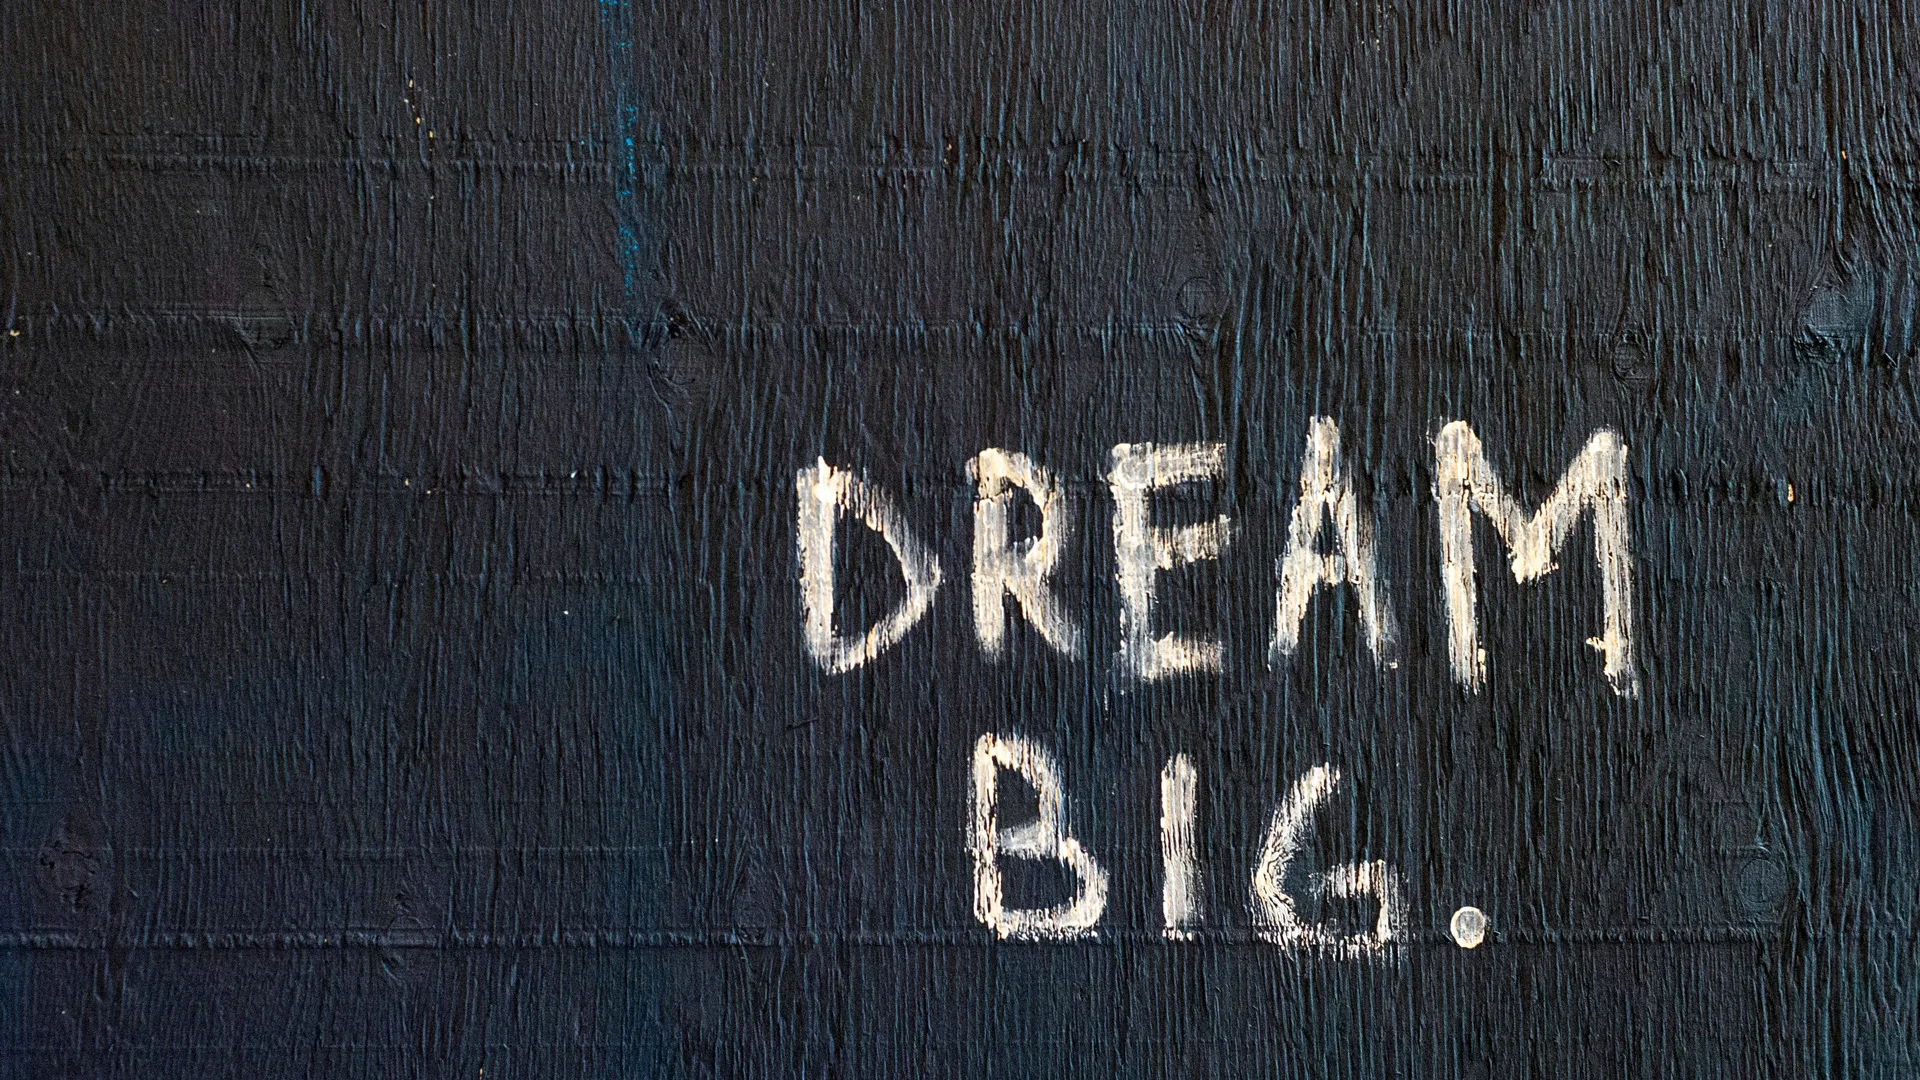 A brick wall with DREAM BIG written on it